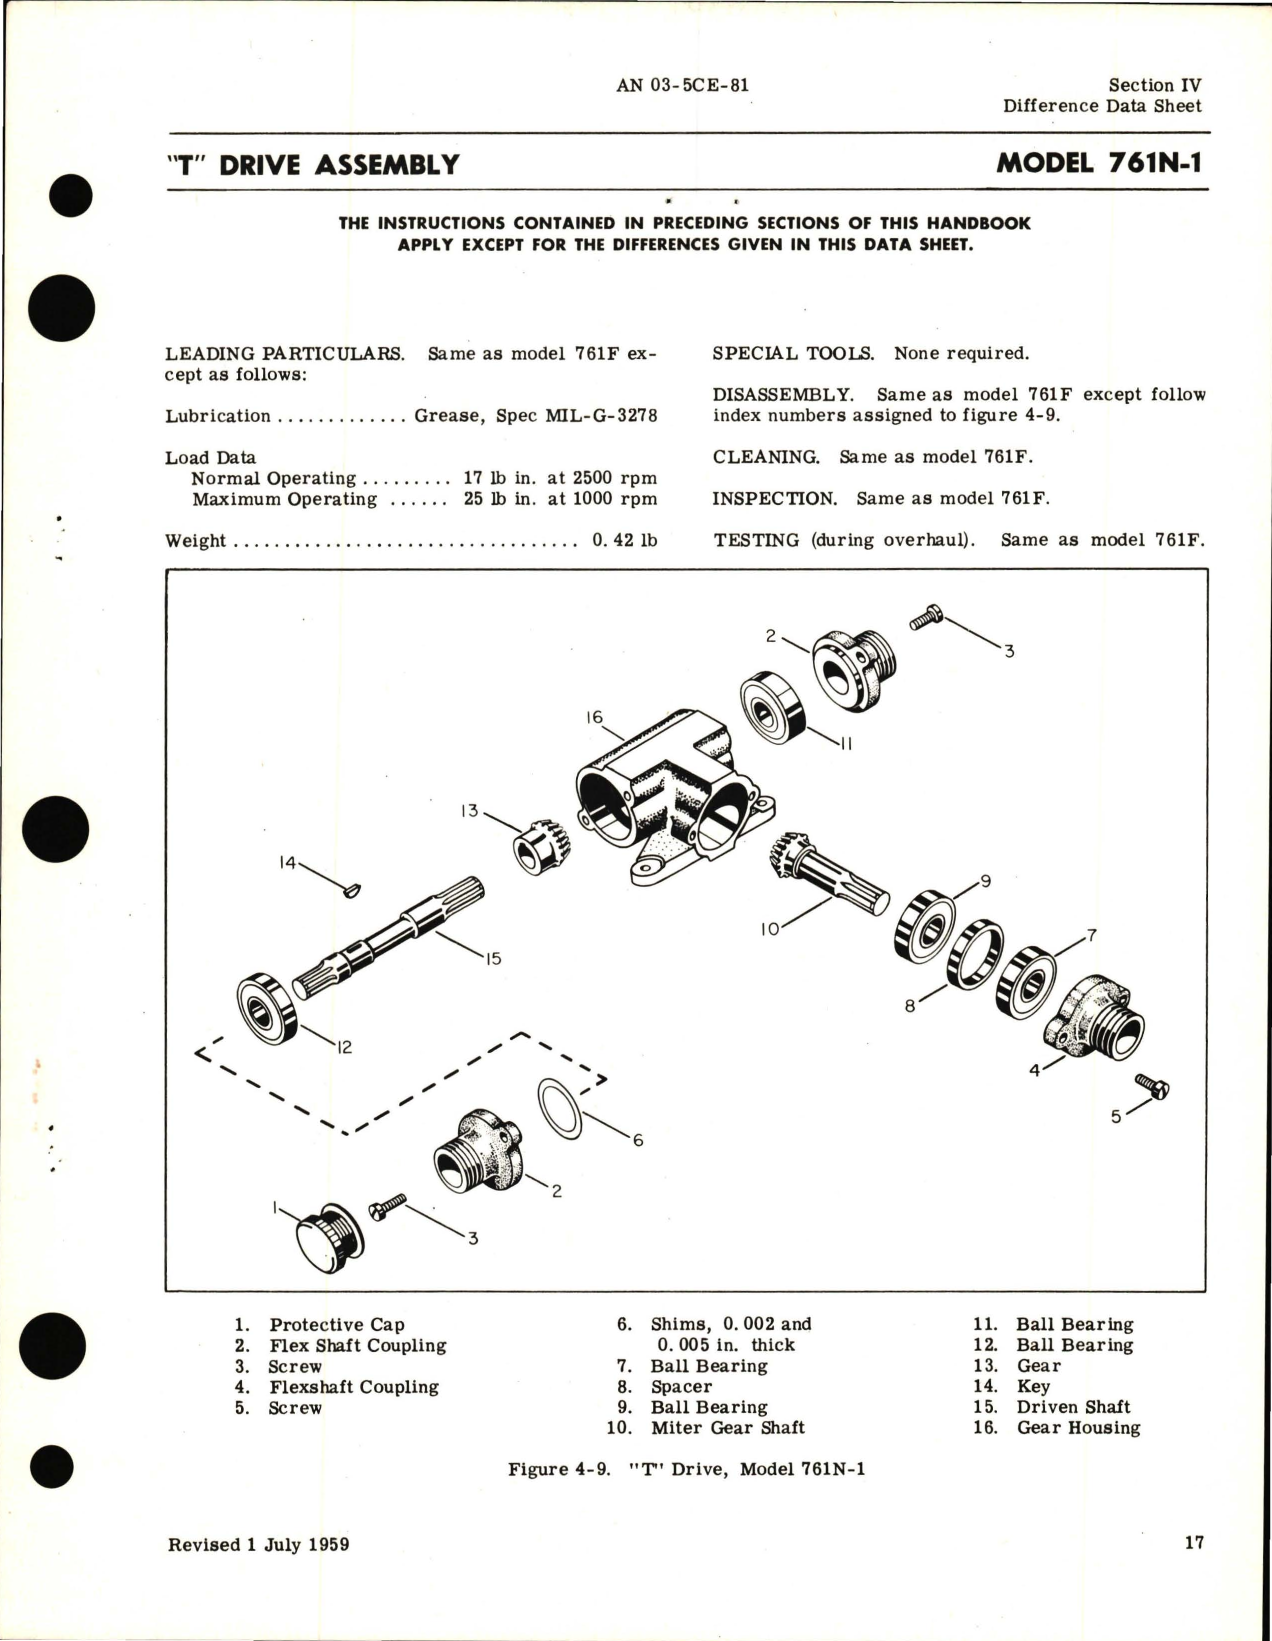 Sample page 7 from AirCorps Library document: Overhaul Instructions for T and H Drives